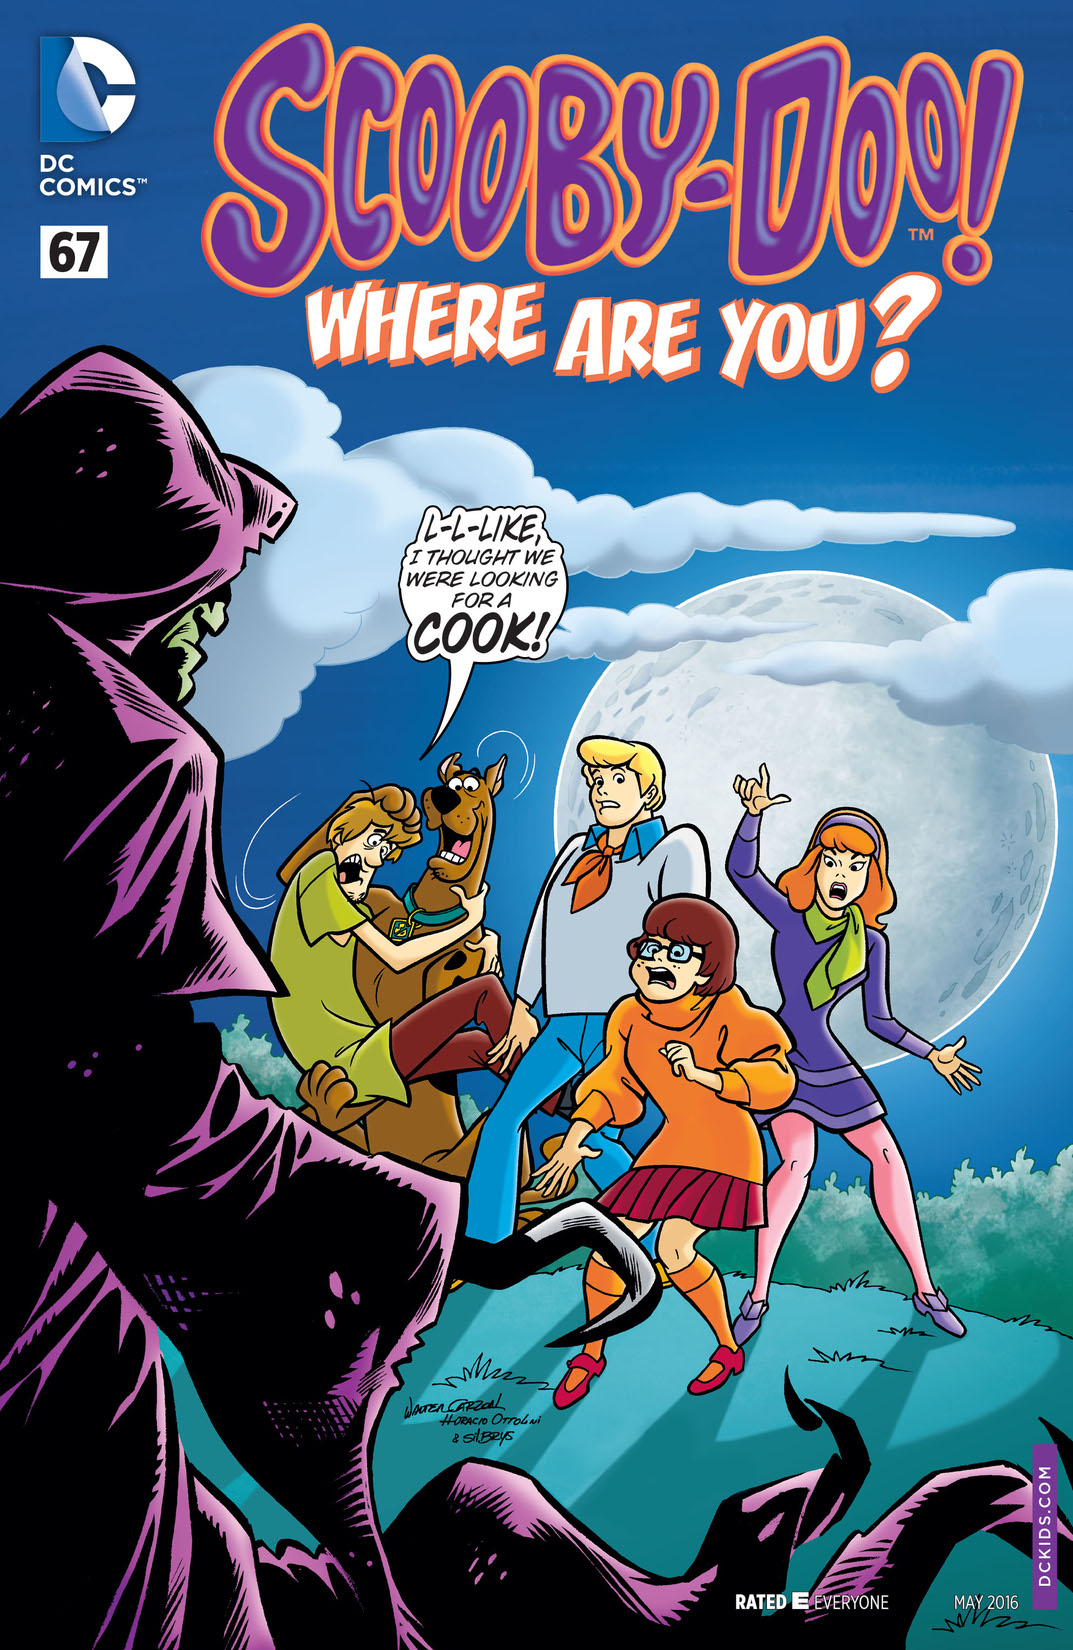 Scooby-Doo, Where Are You? #67 preview images